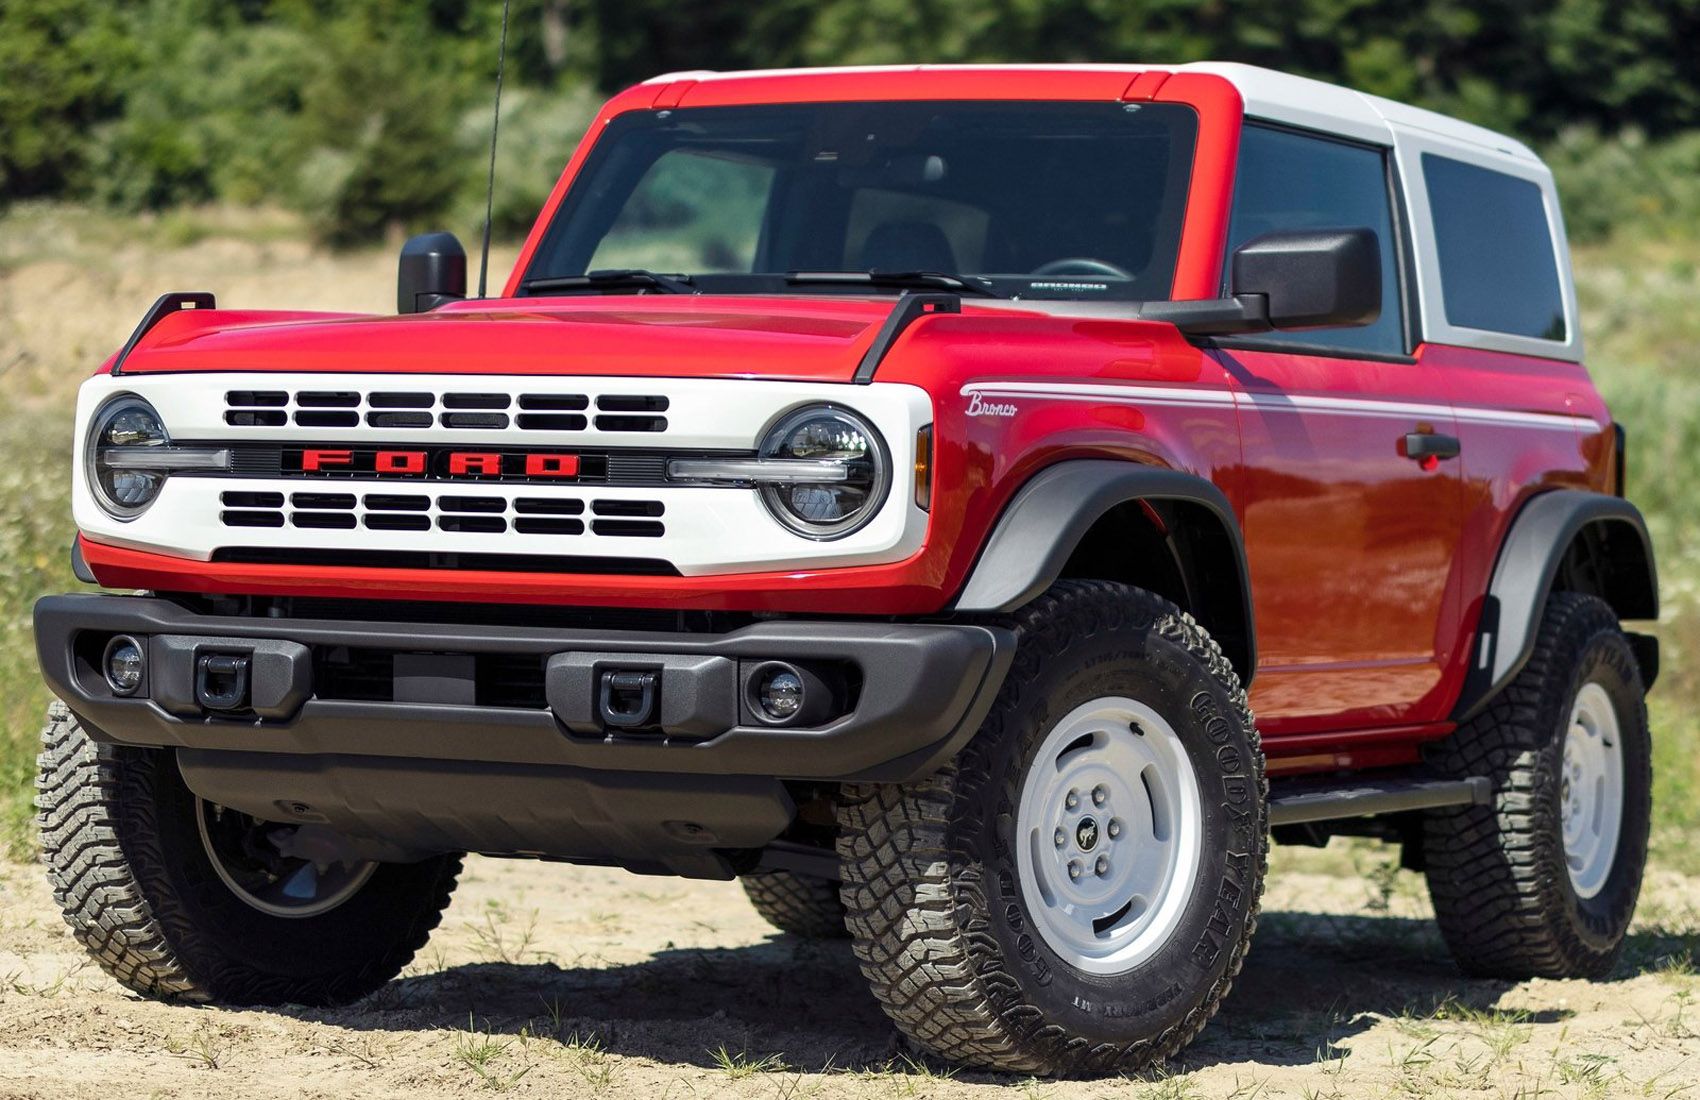 2025 Ford Bronco 2 Door Review Bronco Ford Truck Pickup 2025 2024
Sources Reportedly Mid Coming Say Autoevolution